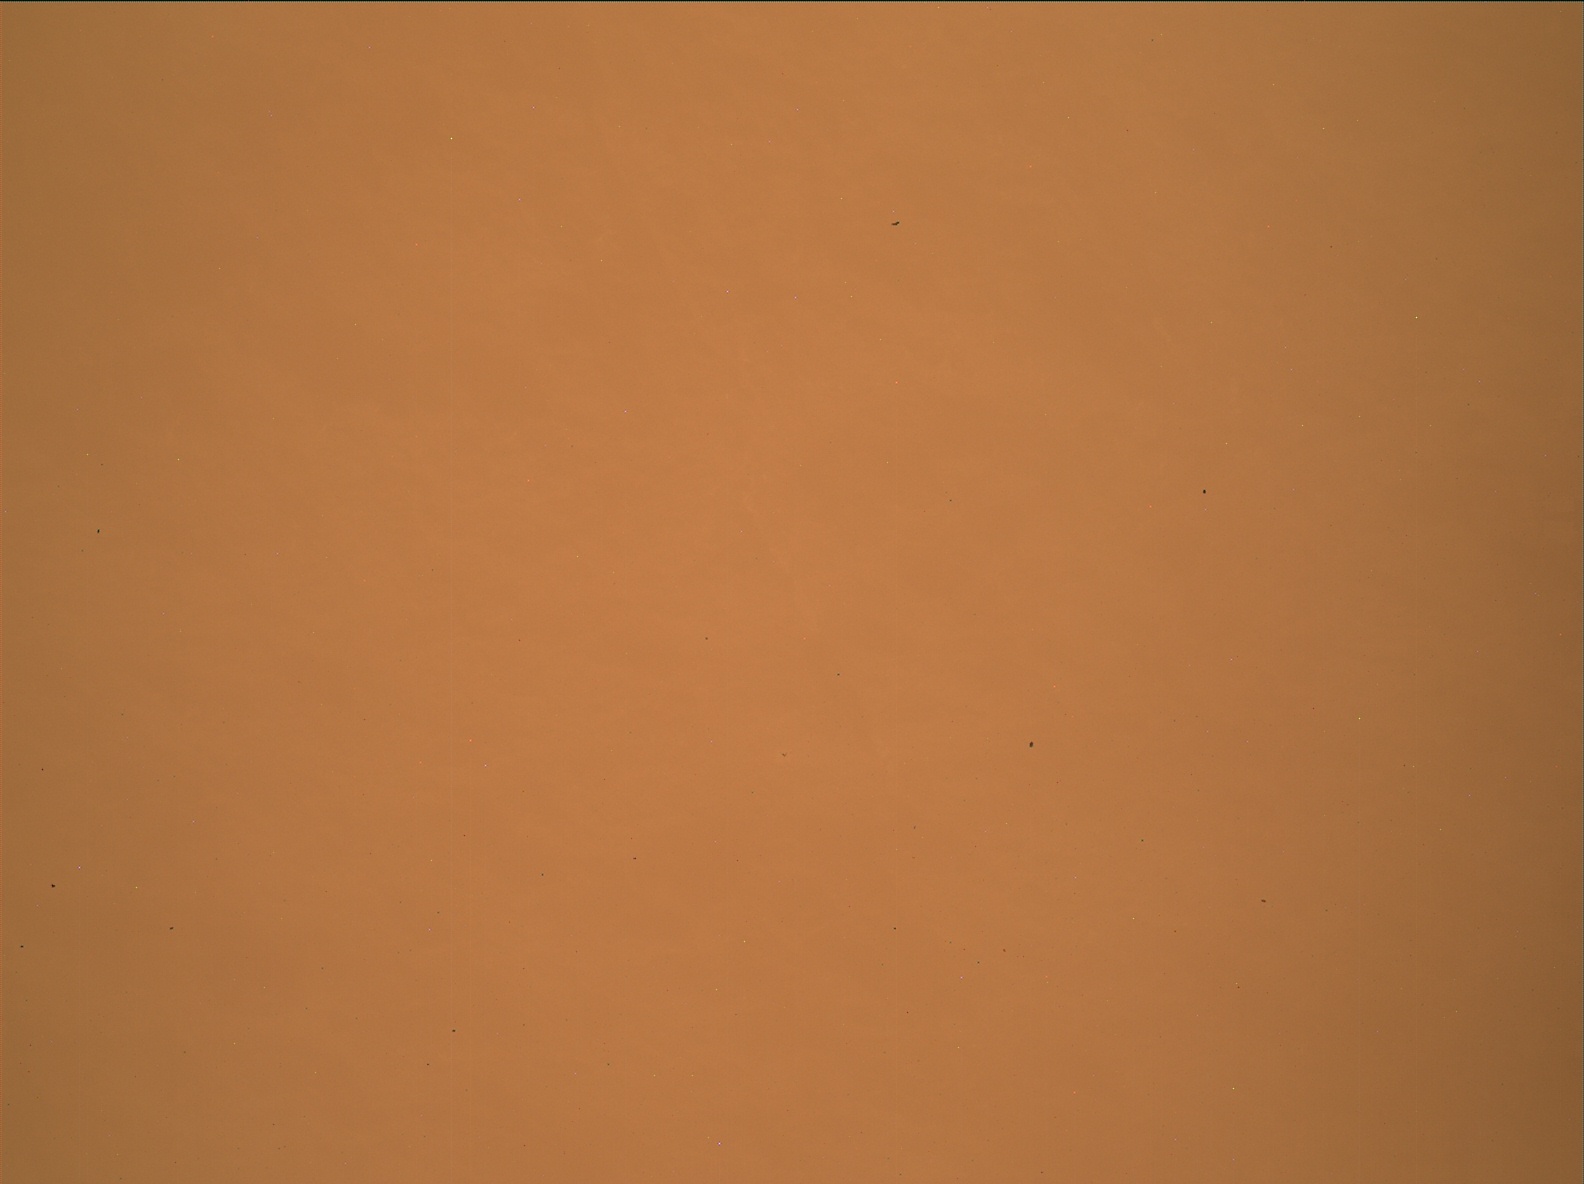 Nasa's Mars rover Curiosity acquired this image using its Mars Hand Lens Imager (MAHLI) on Sol 2297